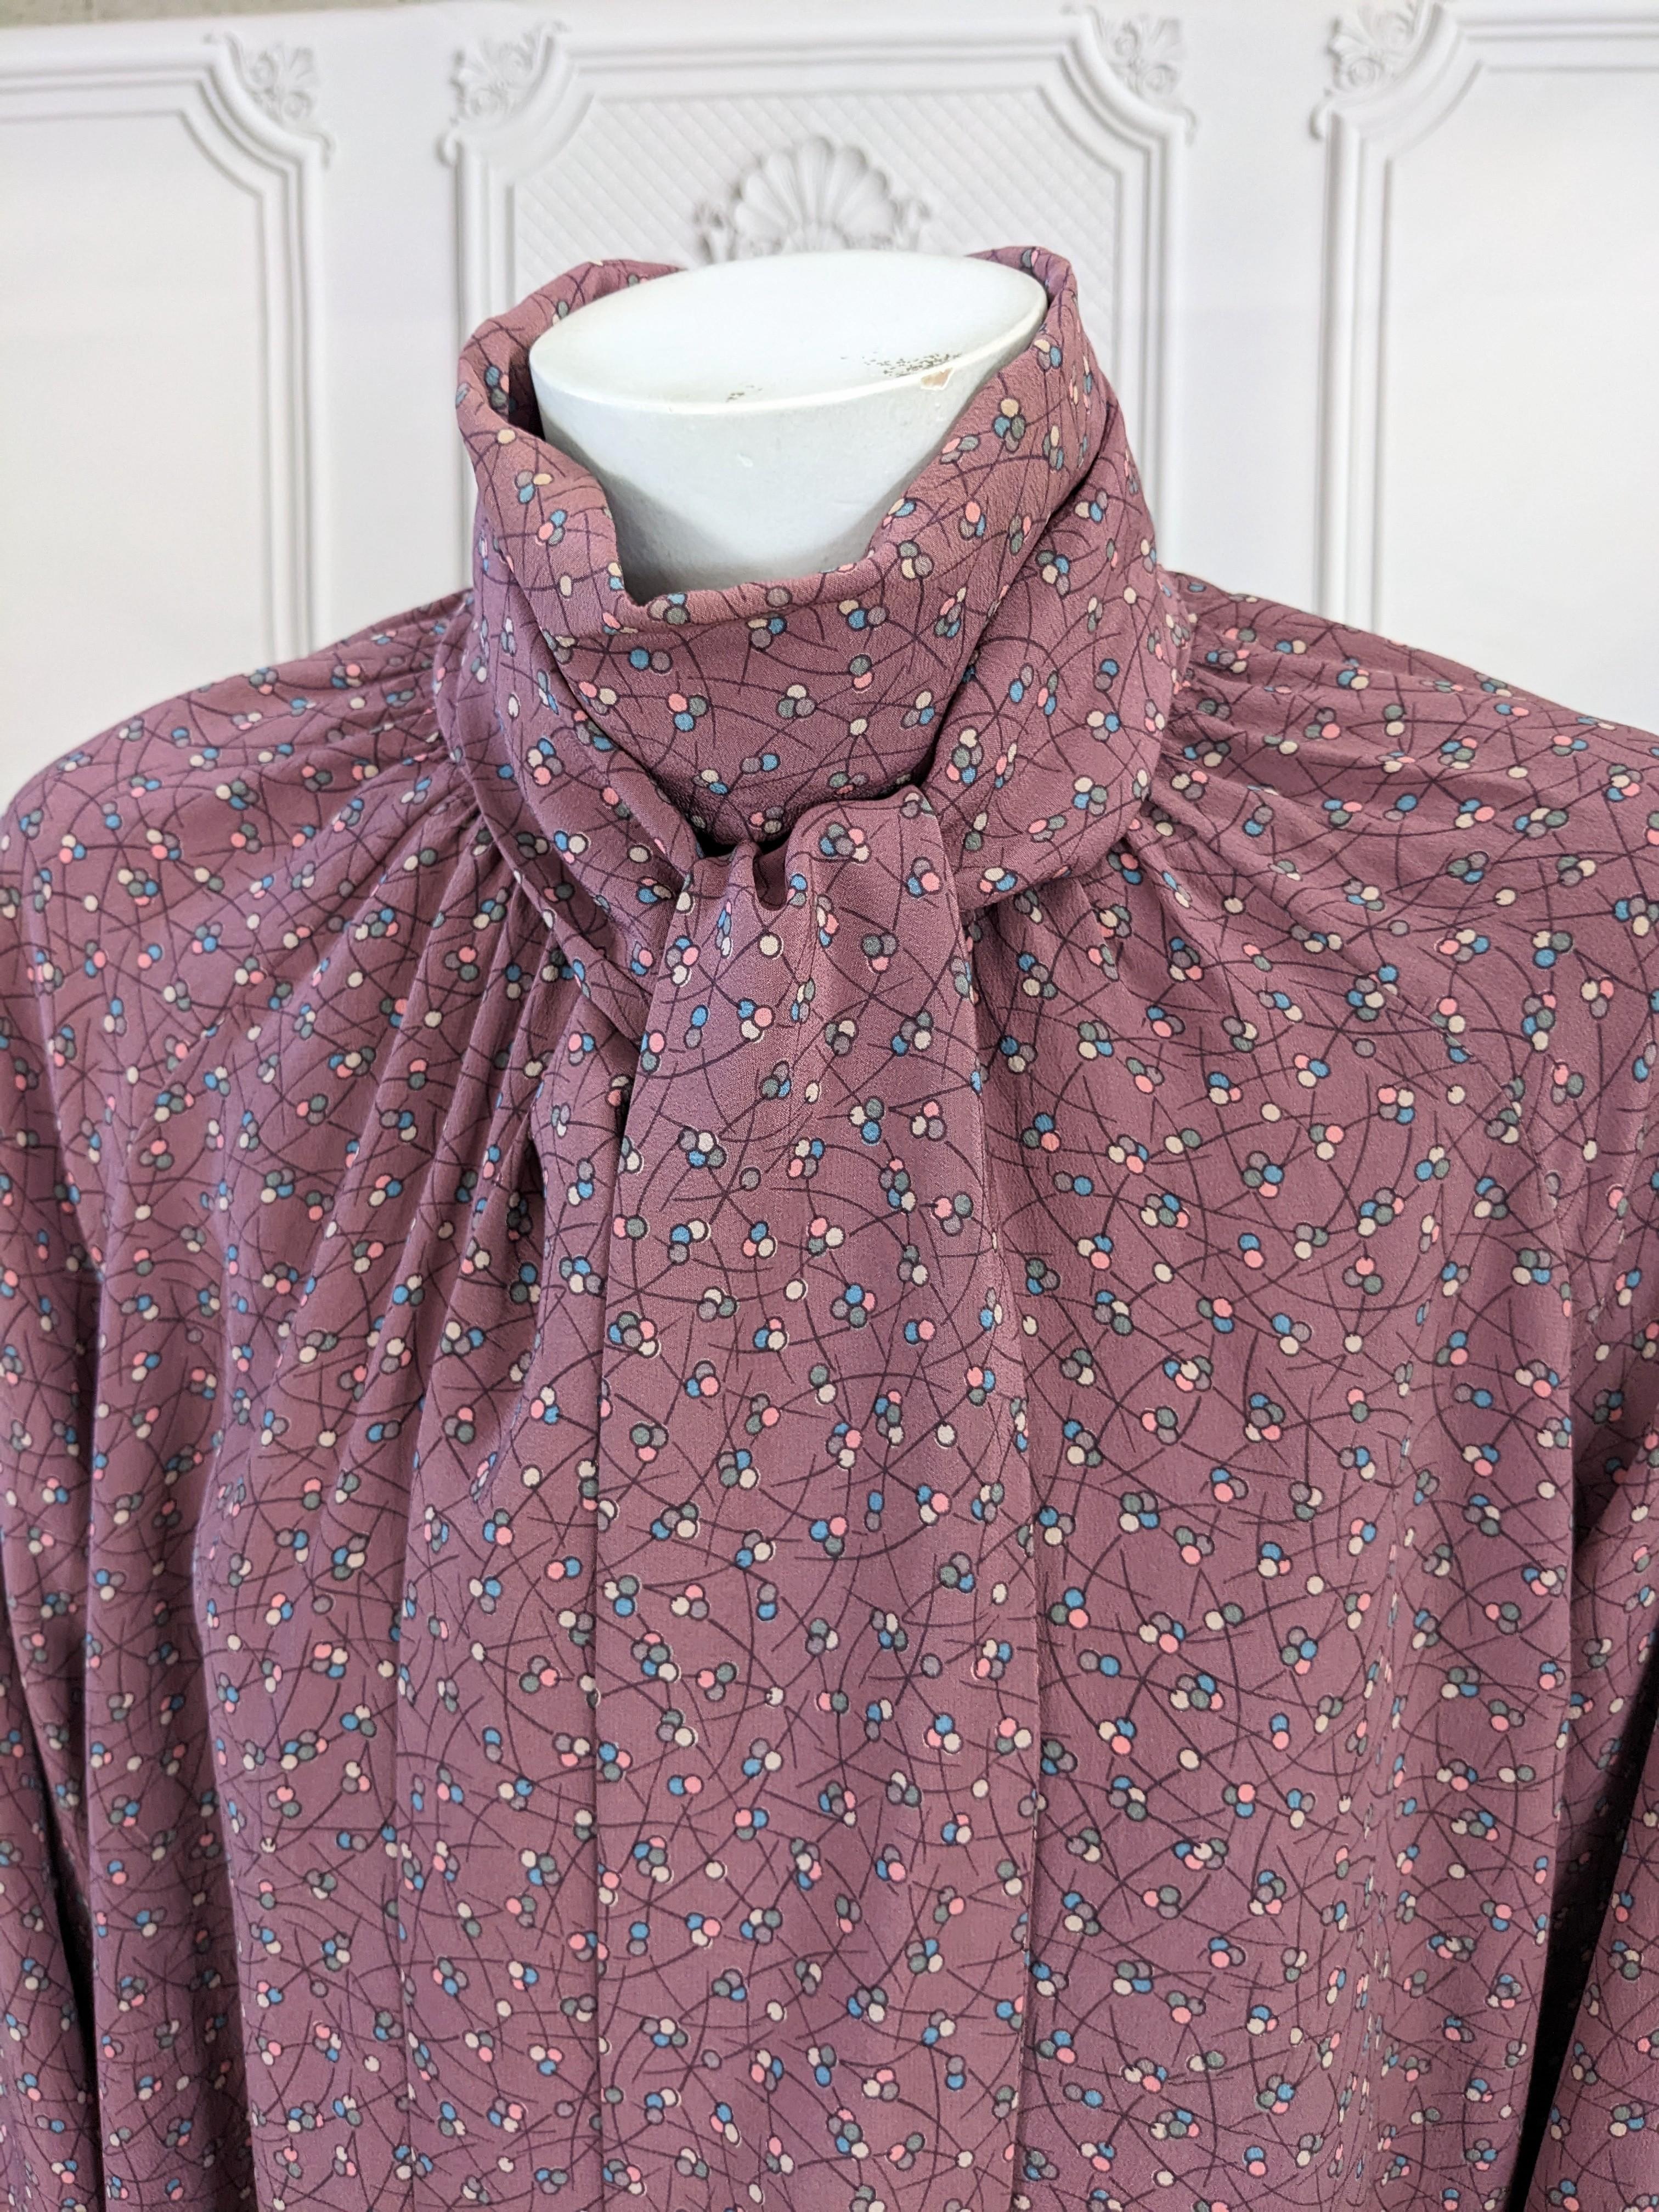 Chloe by Karl Lagerfeld Bow Tied Poets Blouse in blueberry floral Japonesque printed silk crepe. High double wrapped tie closes with a bow at front gathered neckline and huge gathered sleeves with an unusual split buttoned cuff. Very 18th Century